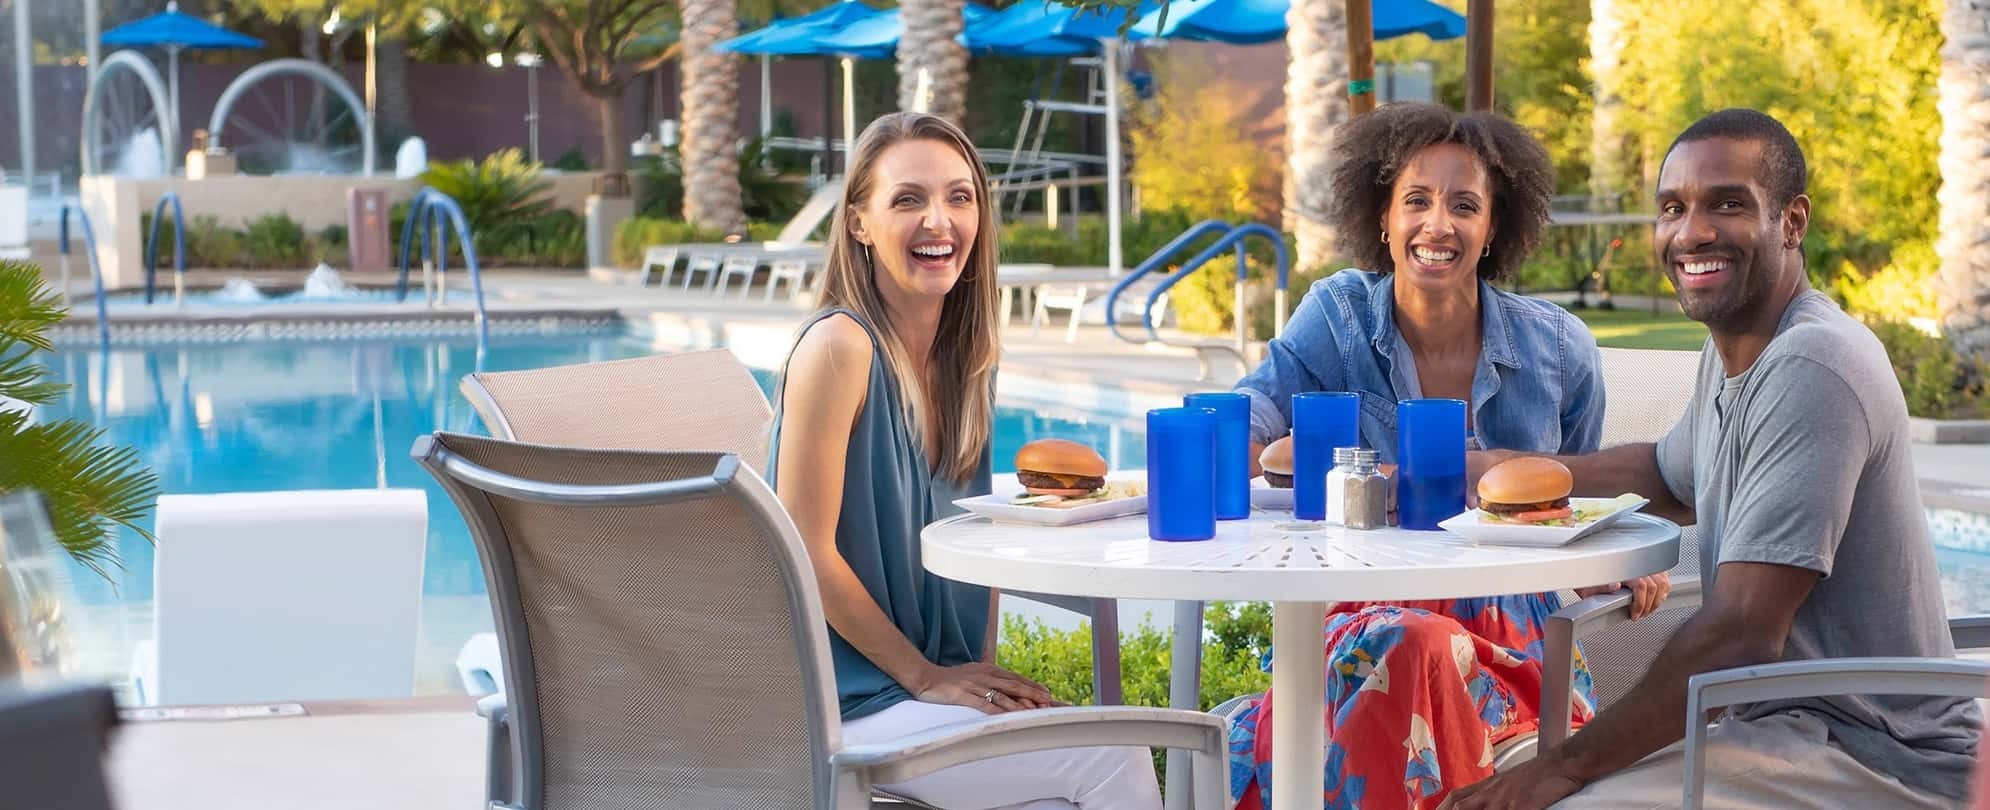 Three smiling adults enjoy burgers and drinks in blue cups at a poolside table of a Margaritaville Vacation Club resort.